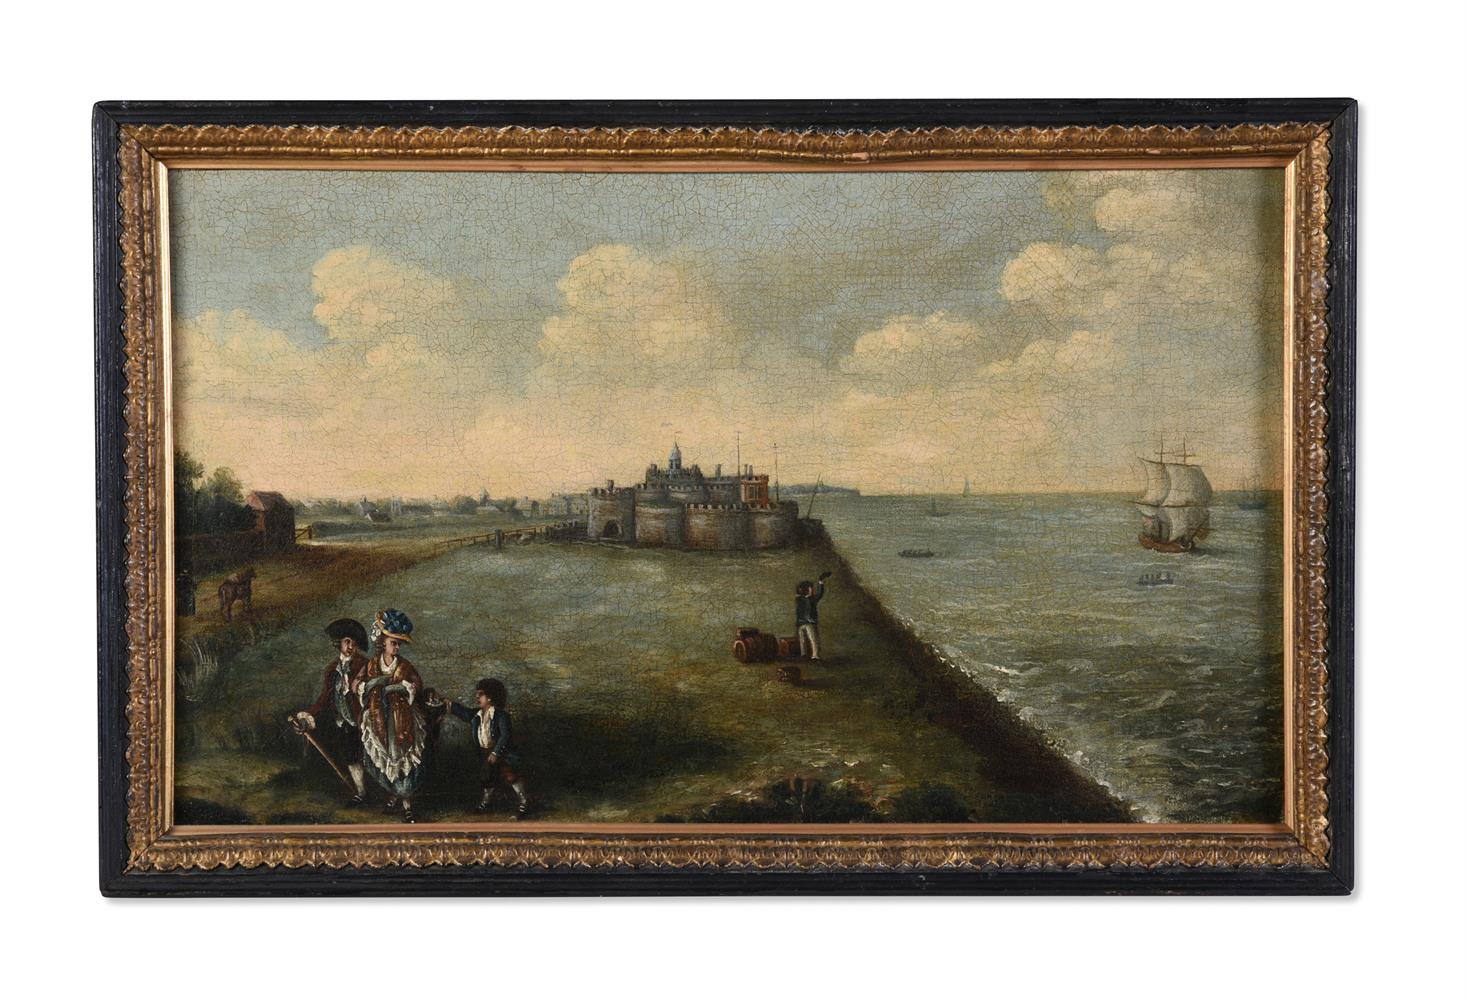 ENGLISH SCHOOL (18TH CENTURY), A VIEW OF DEAL CASTLE